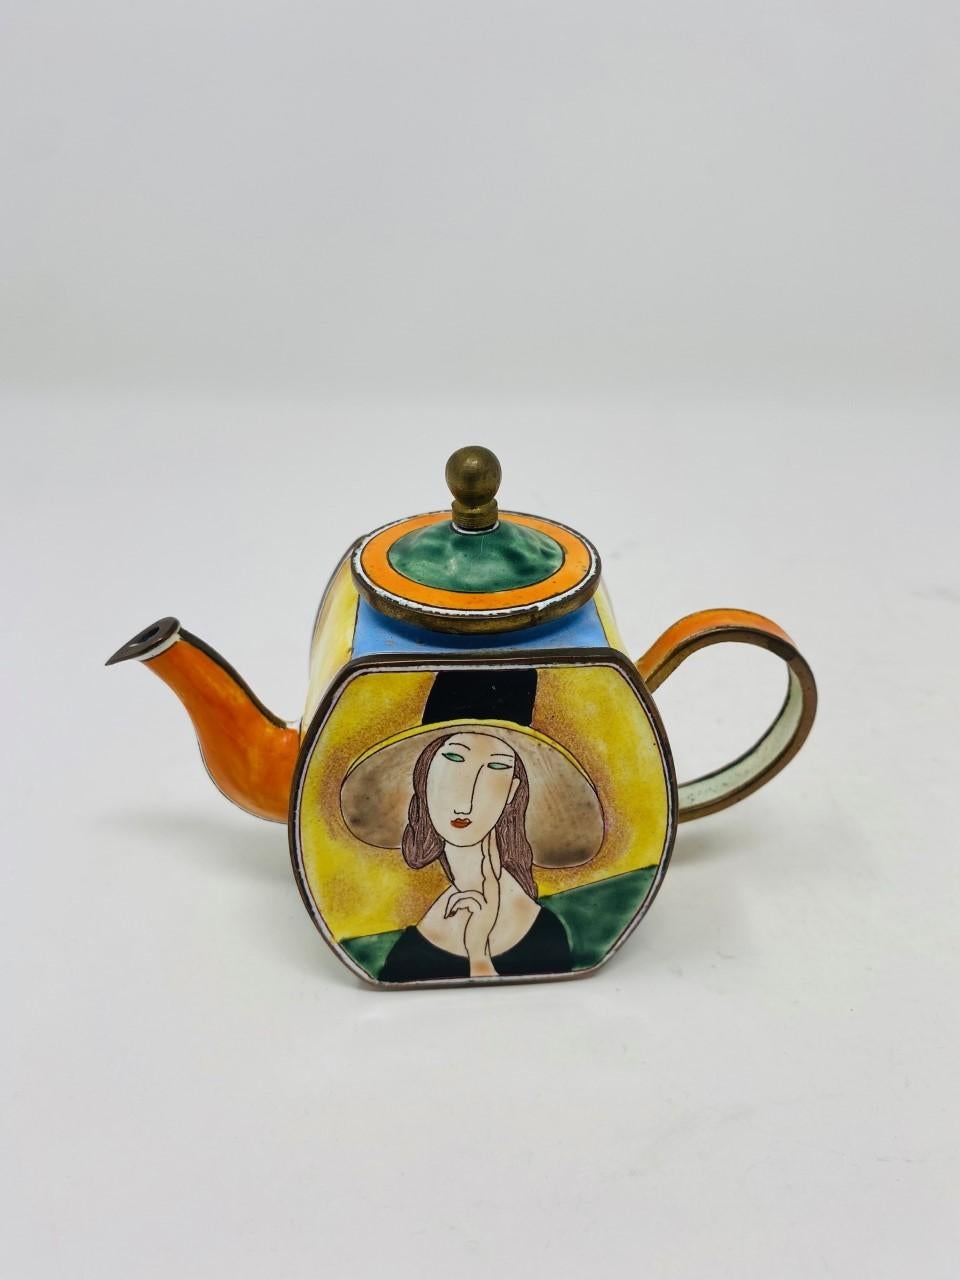 American Craftsman Miniature Enameled Tea Pot Hand Painted Modigliani Lady with Hat by Kelvin Chen